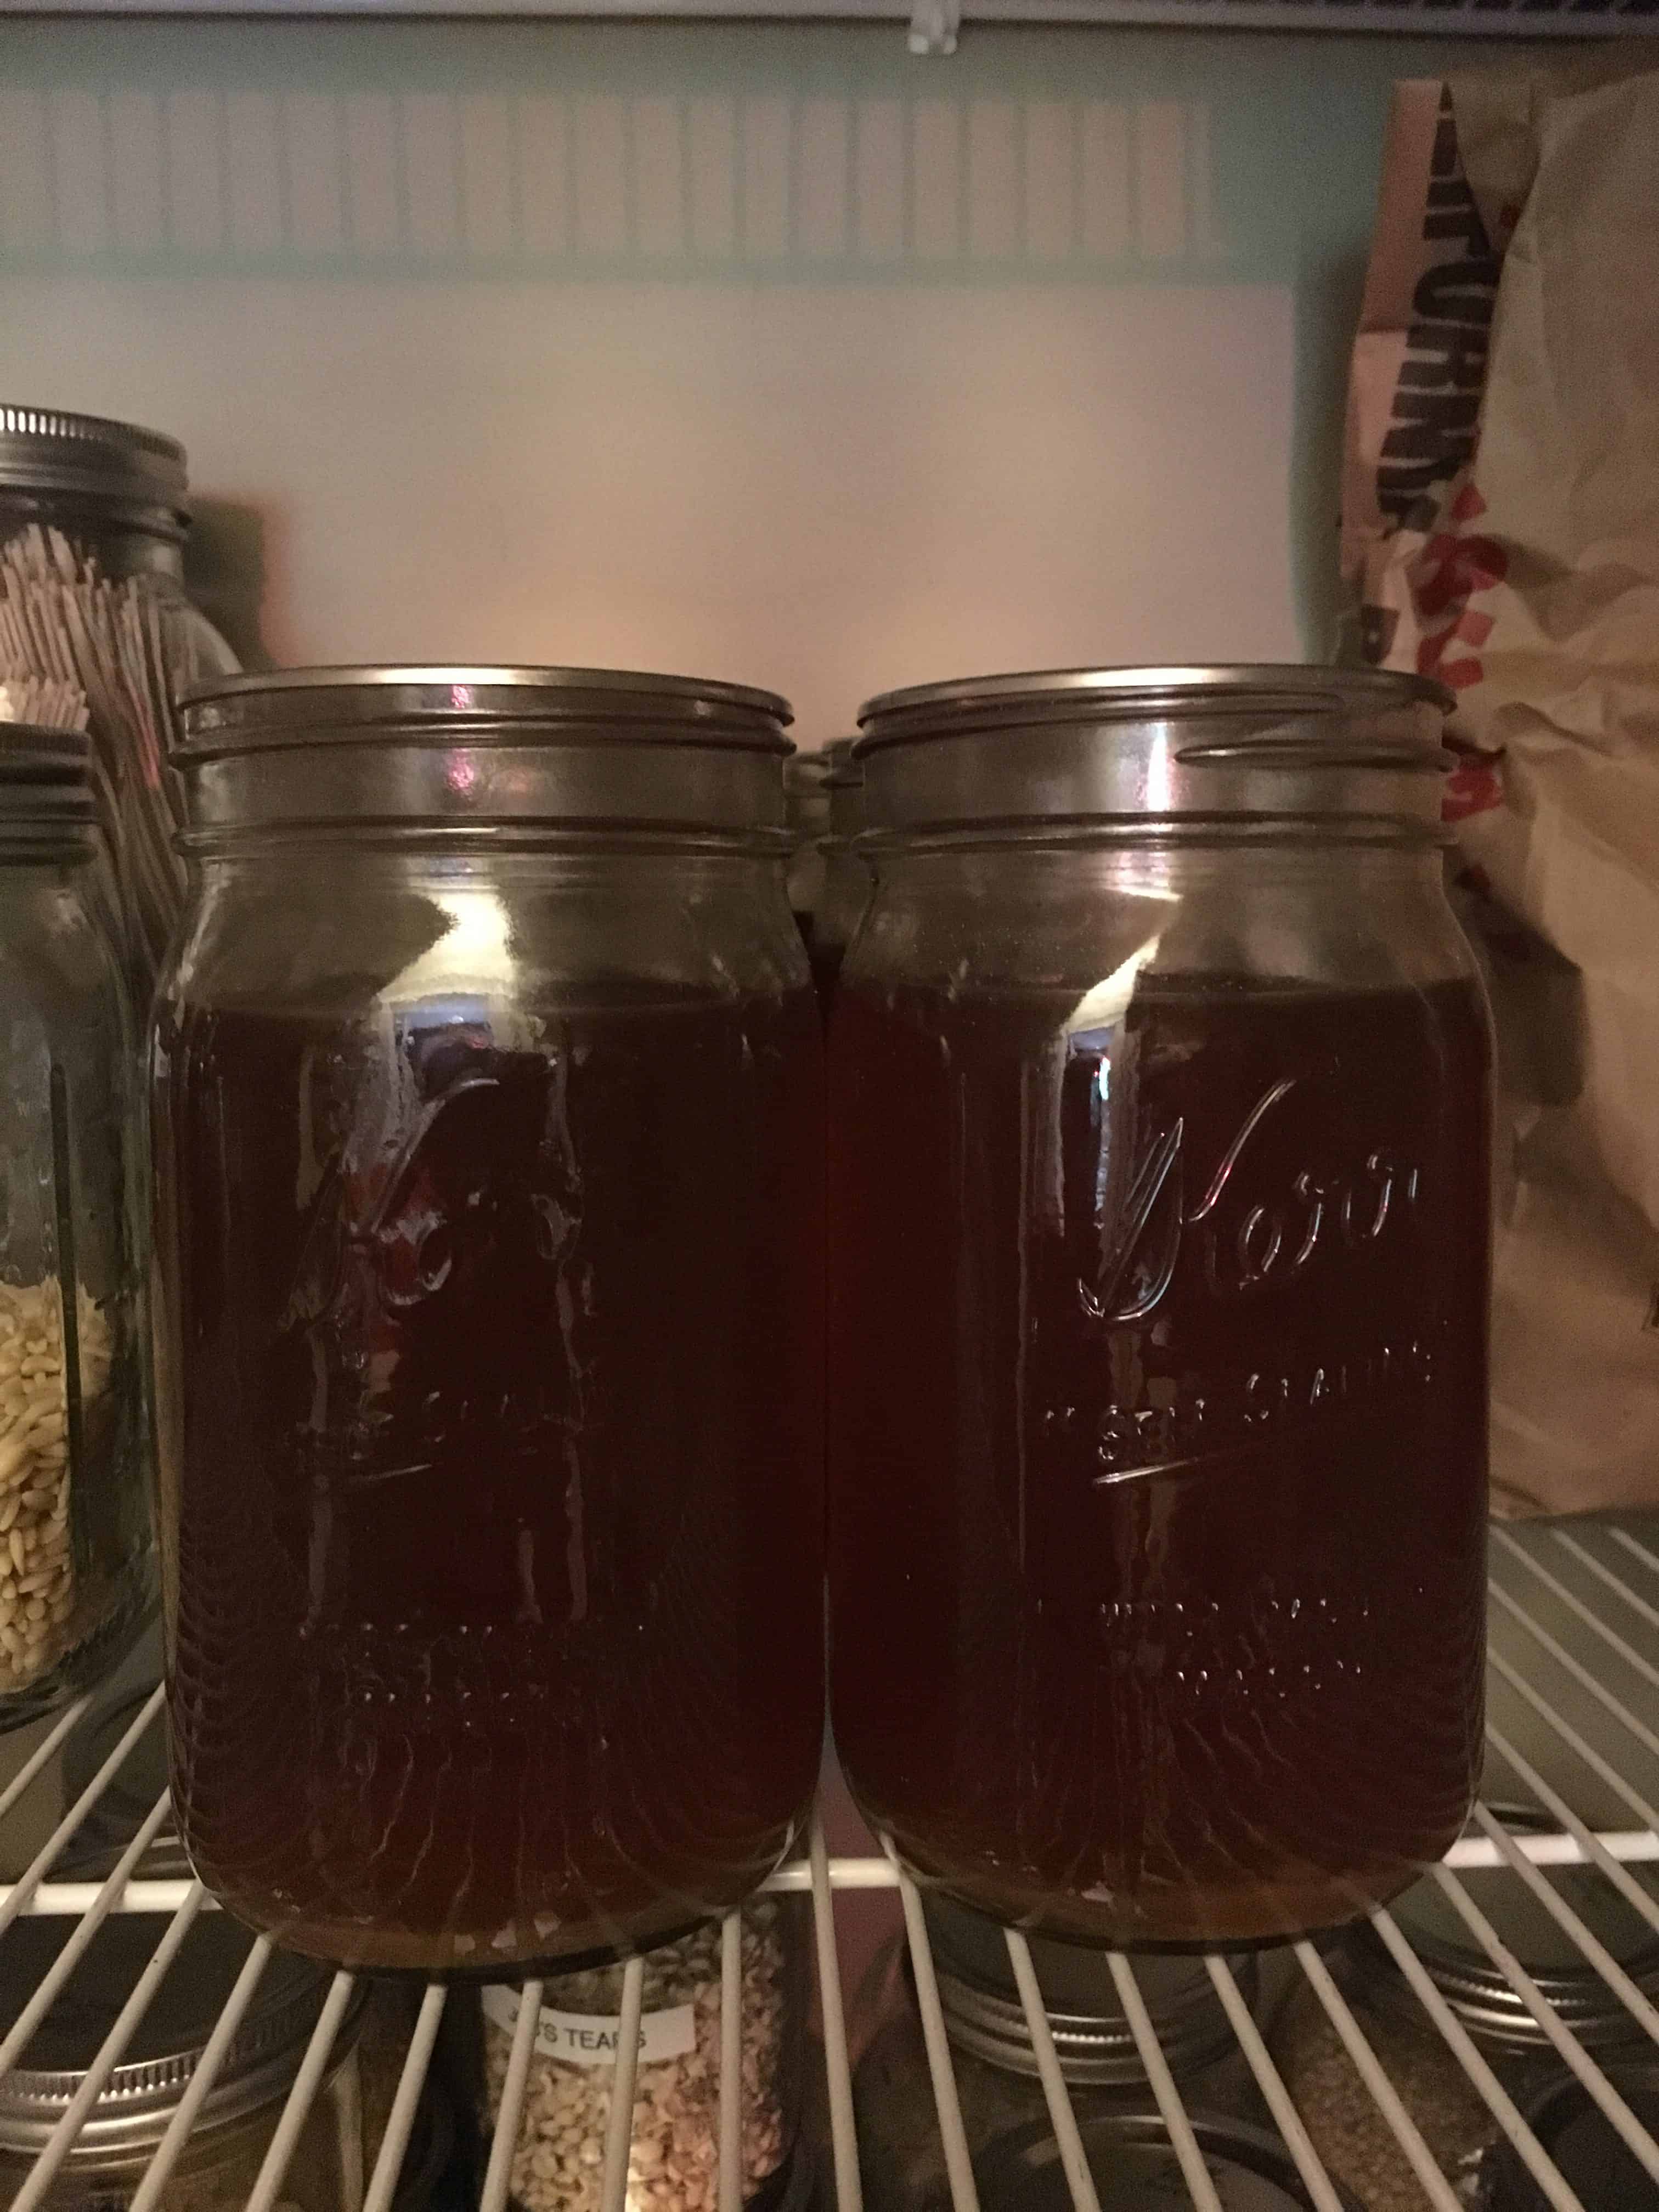 Jars of home canned vegetable broth from zero waste vegan pantry https://trimazing.com